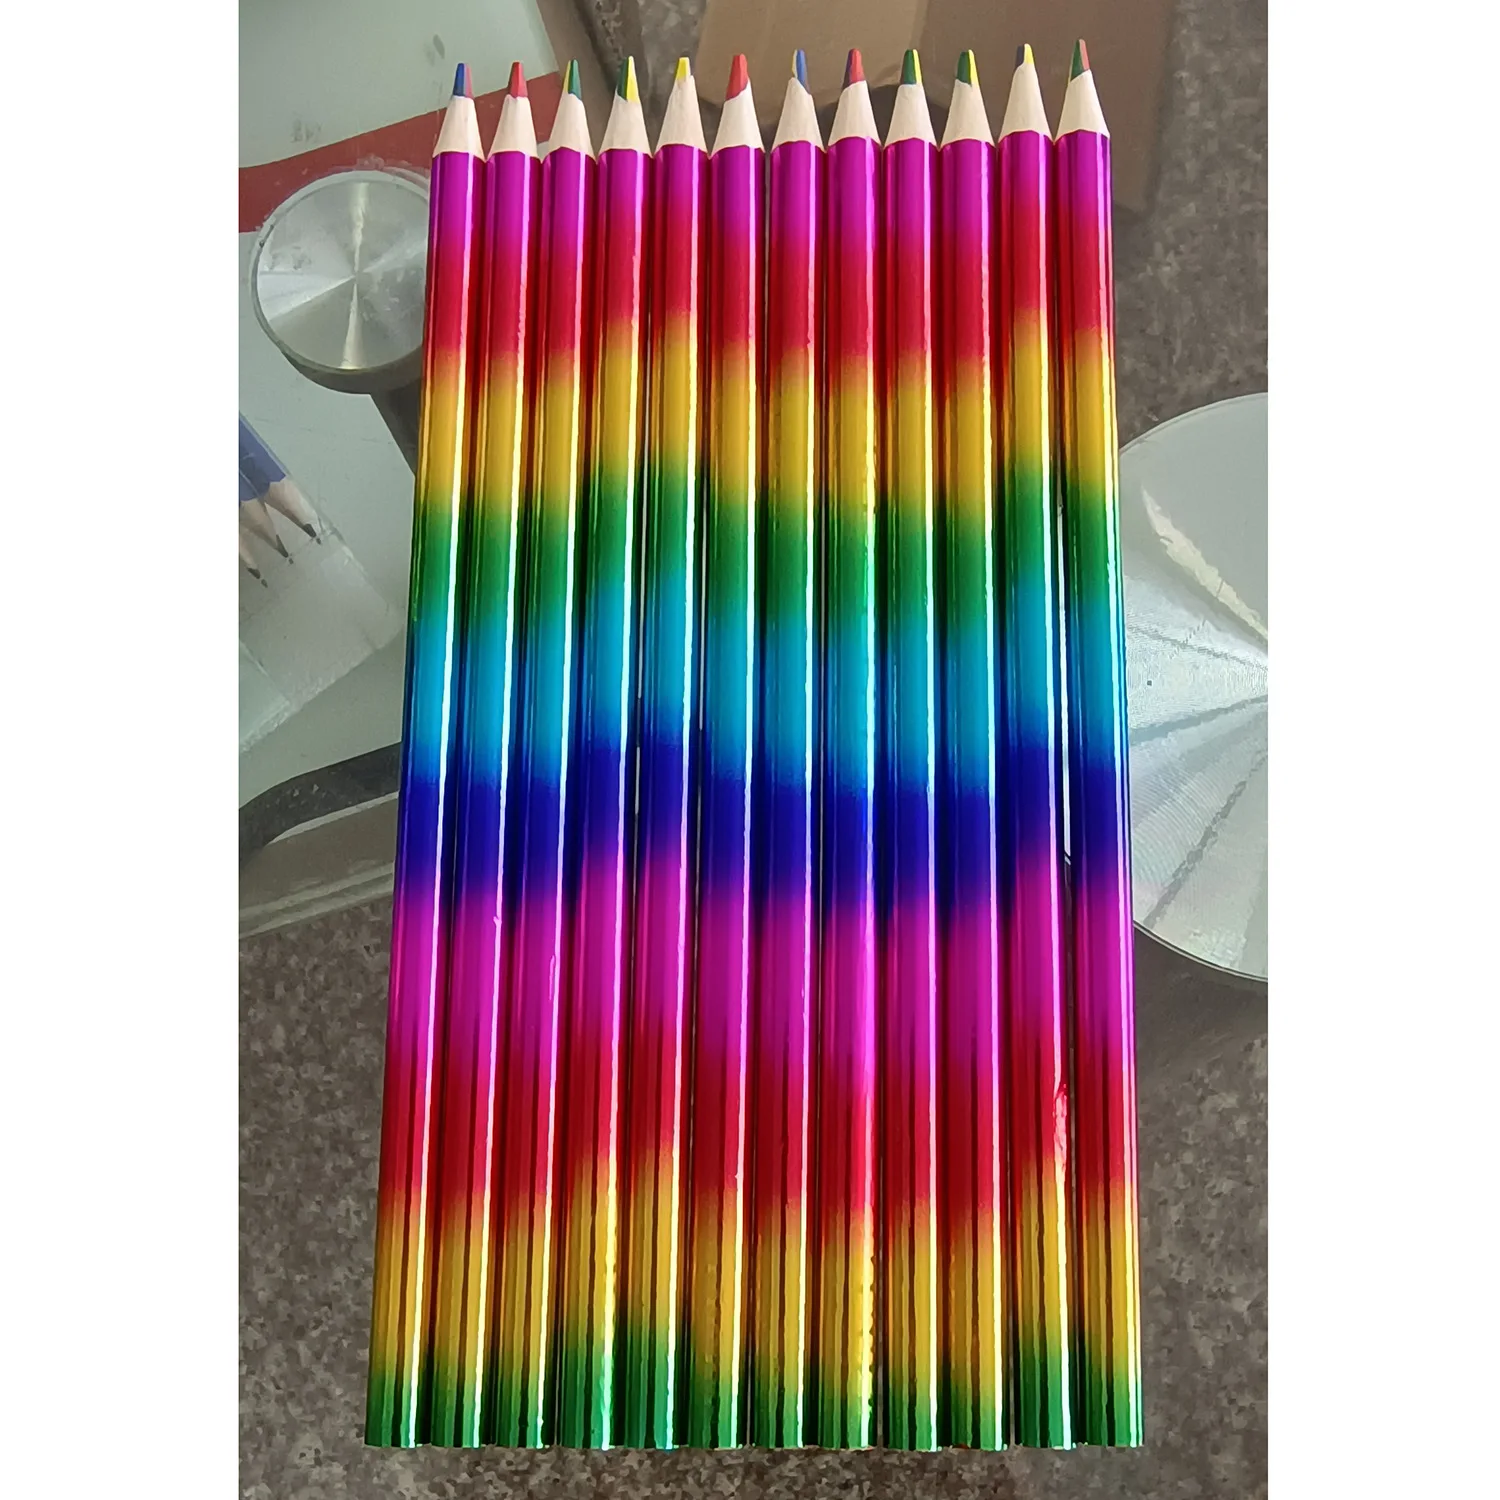 12Pcs 4 Colors in 1 Rainbow Colored Pencils Sketching Painting Crayon for Kids Birhthday Party Favors Back To School Gift Pinata